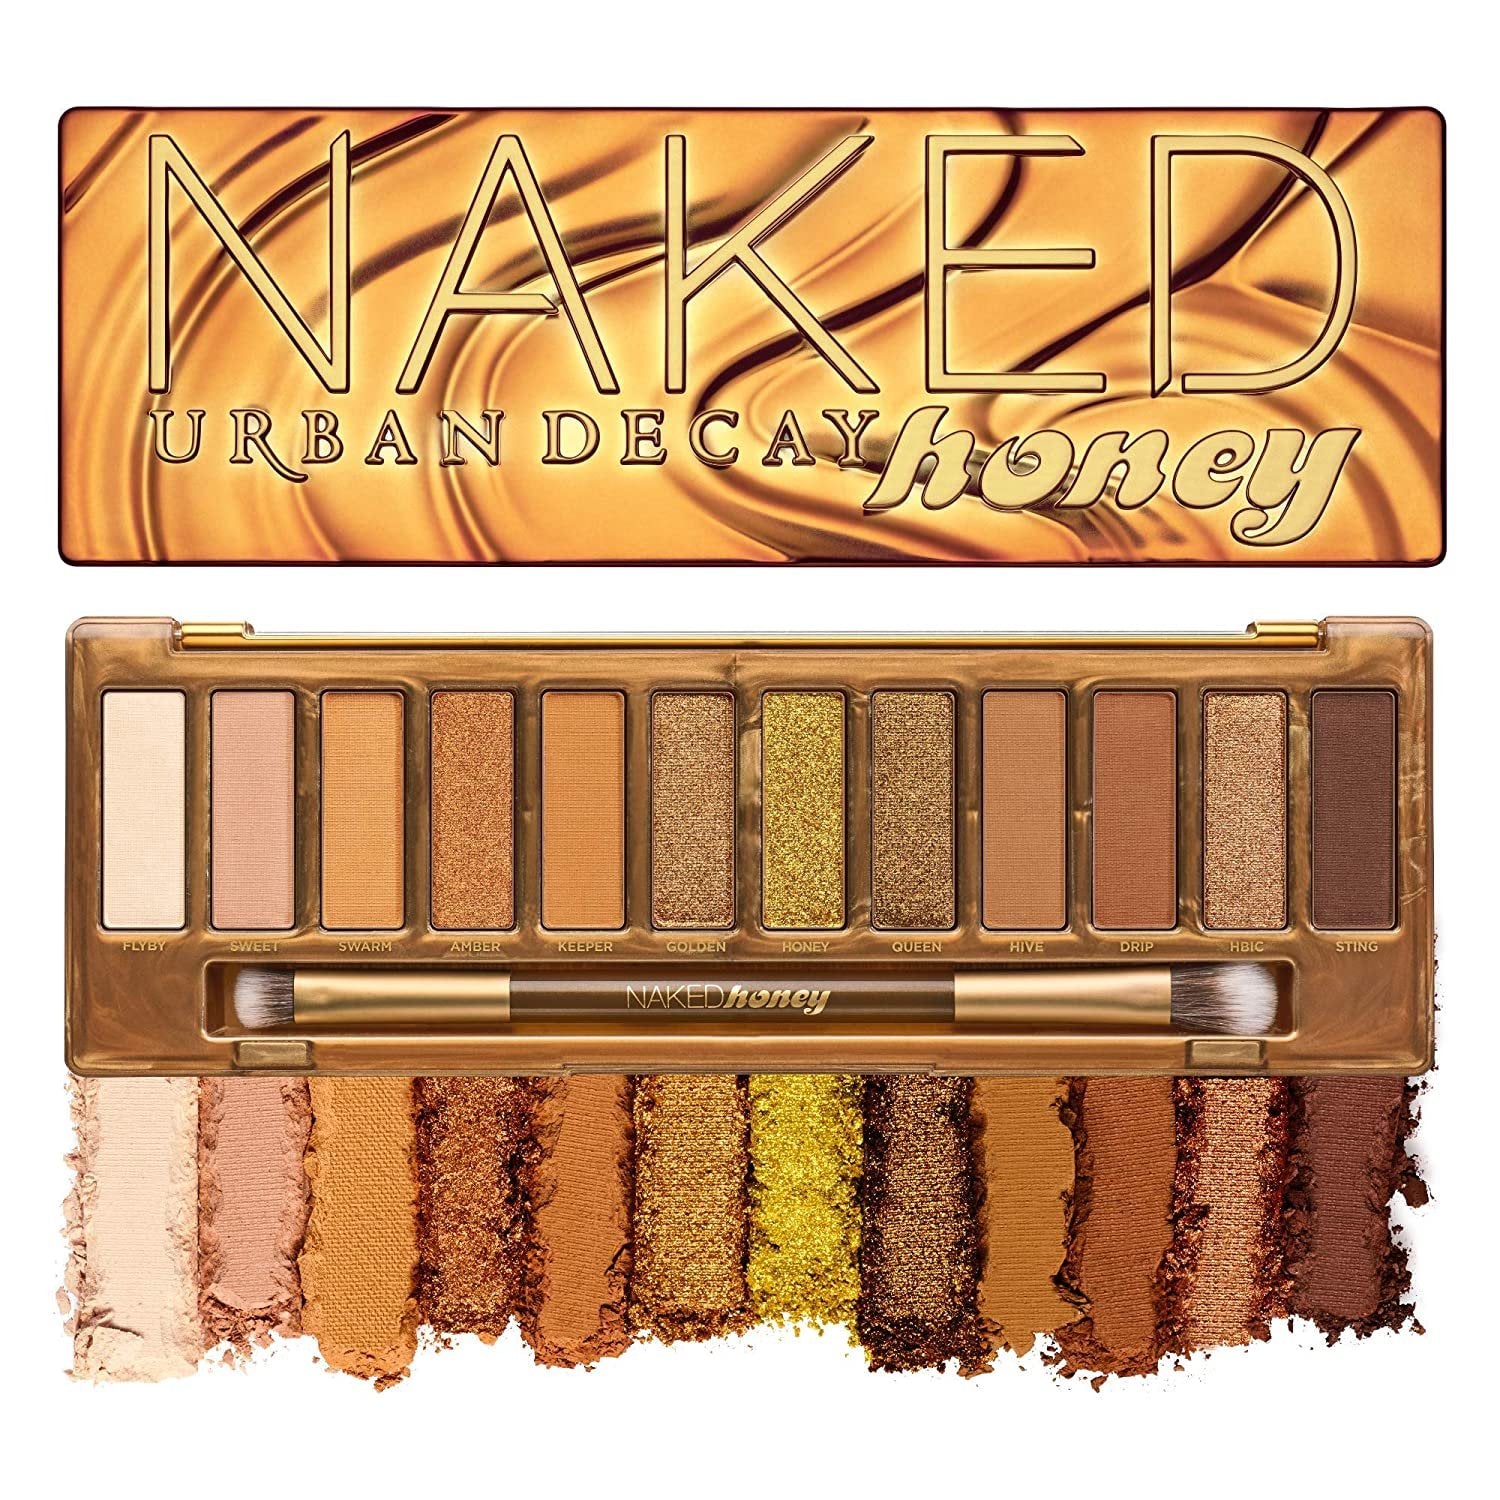 Urban Decay Naked Honey Eyeshadow Palette, 12 Golden Neutral Shades - Ultra-Blendable, Rich Colors with Velvety Texture - Set Includes Mirror & Double-Ended Makeup Brush